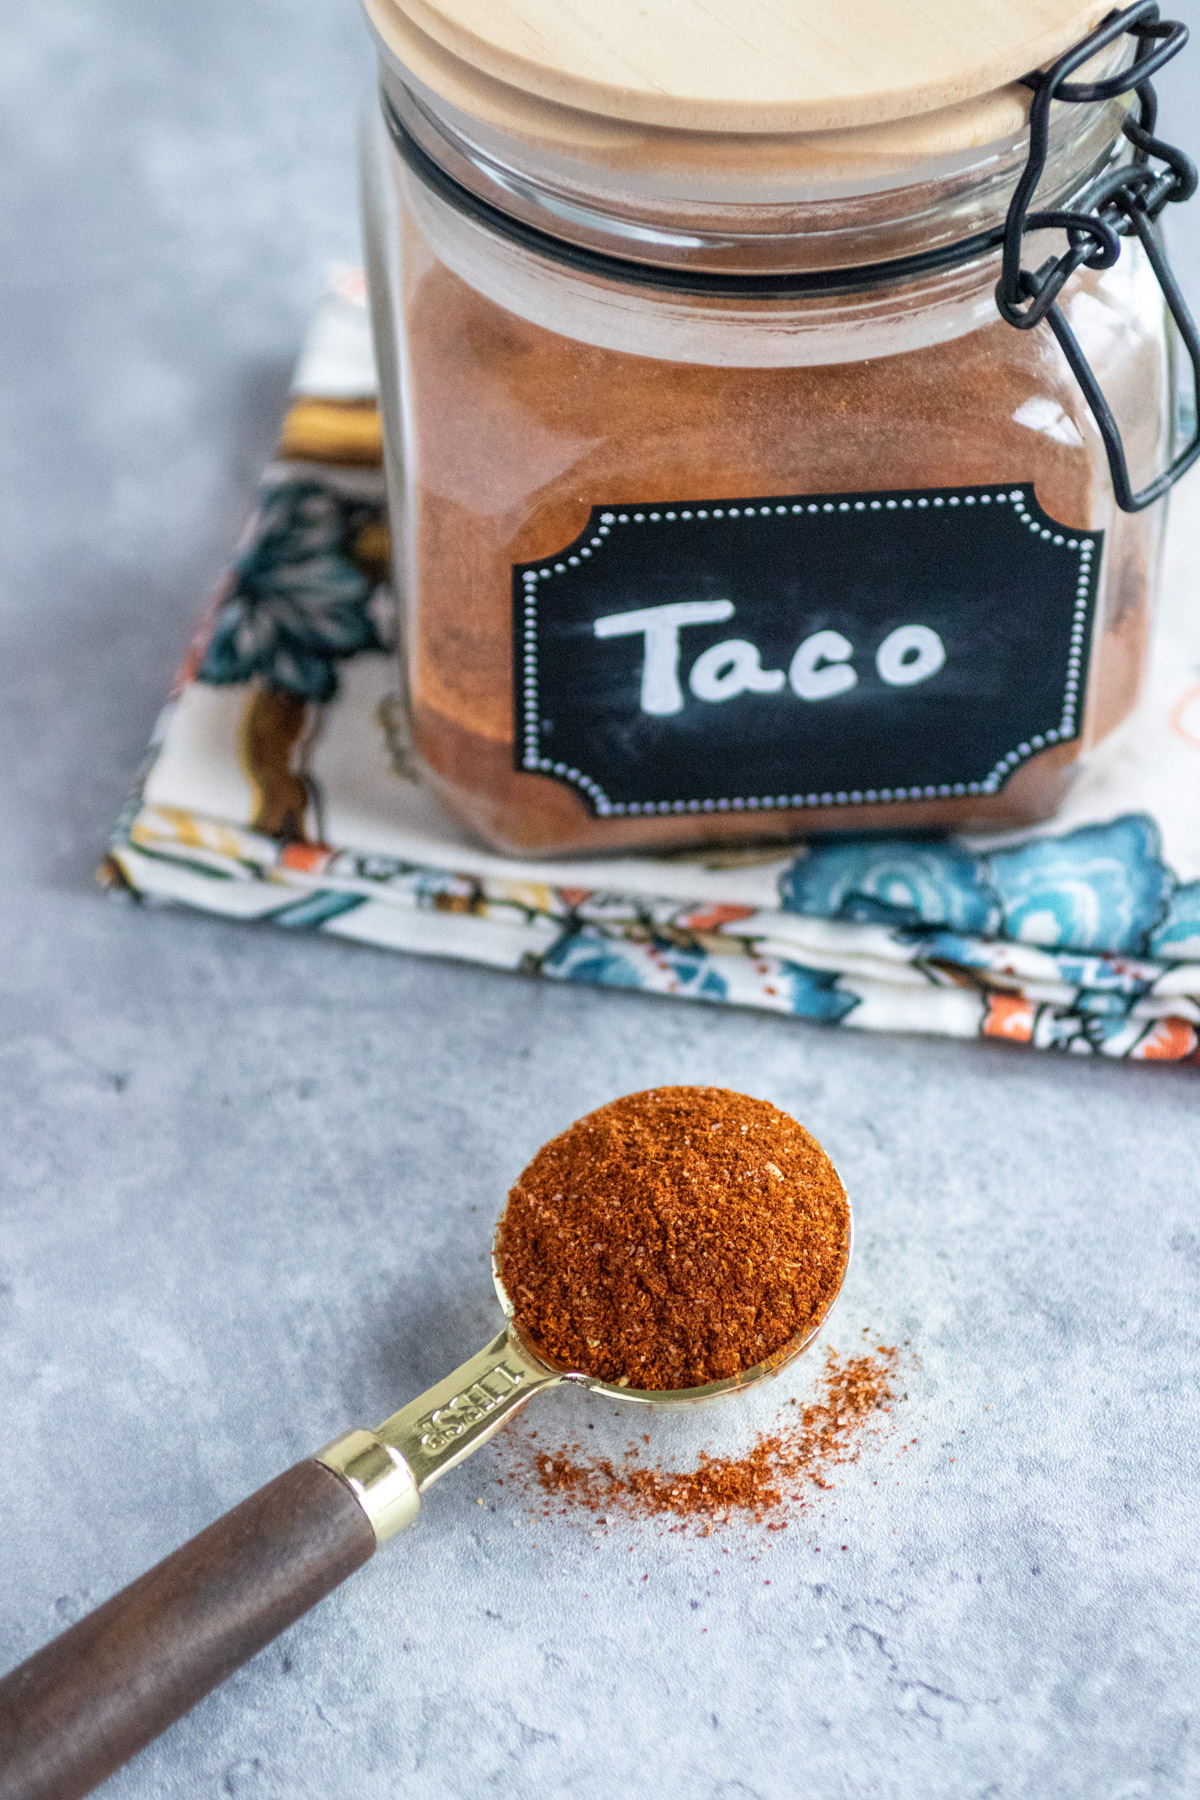 Taco seasoning in a labeled jar with a lid.  The jar is sitting on a floral napkin. A tablespoon with taco season mix in it.